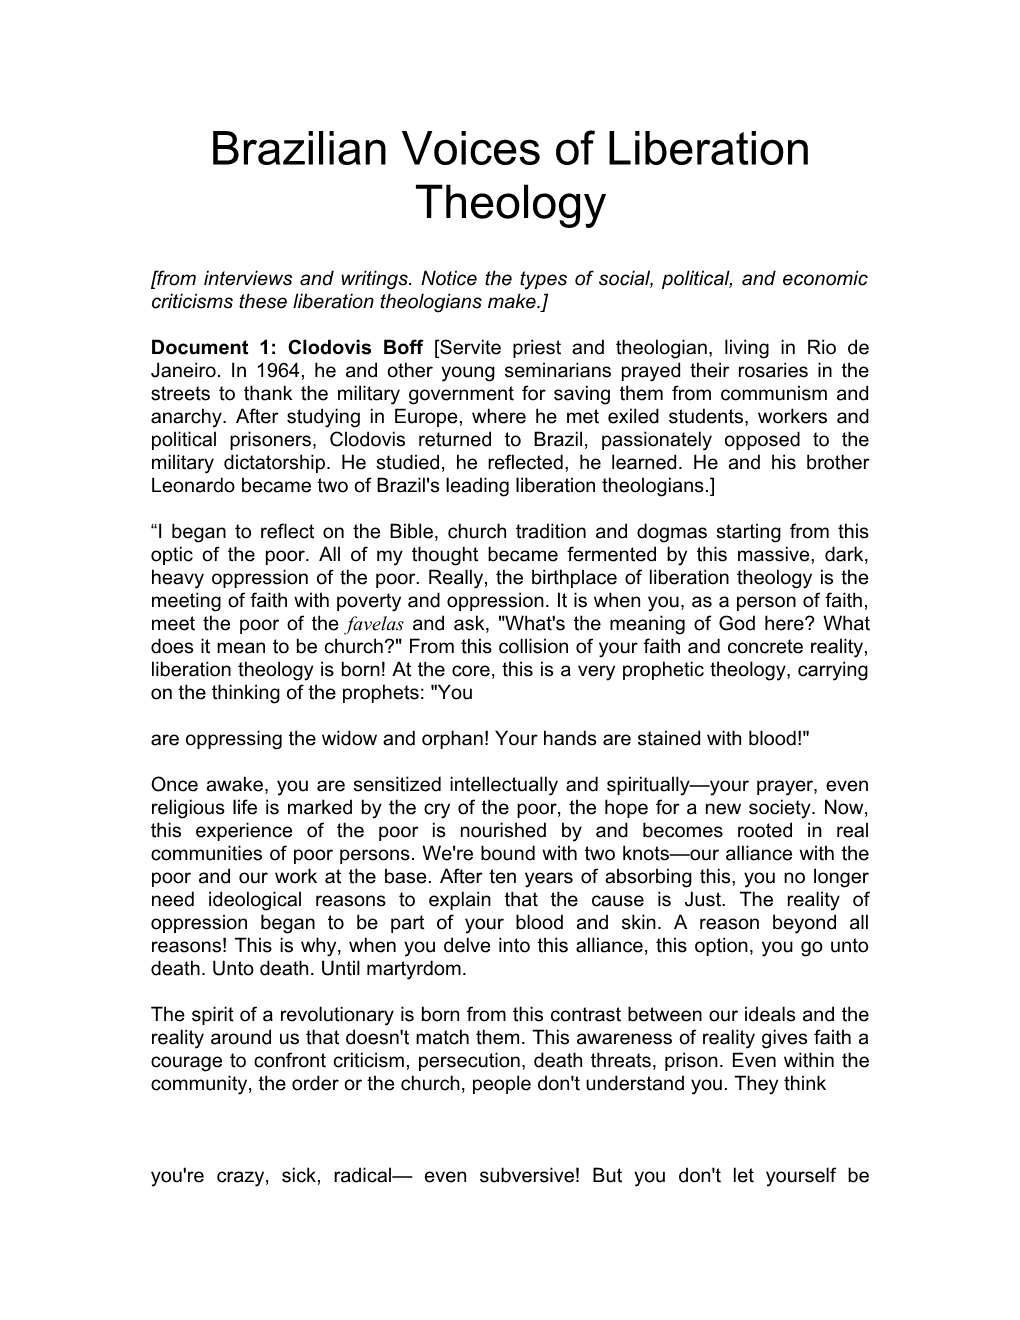 Brazilian Voices of Liberation Theology